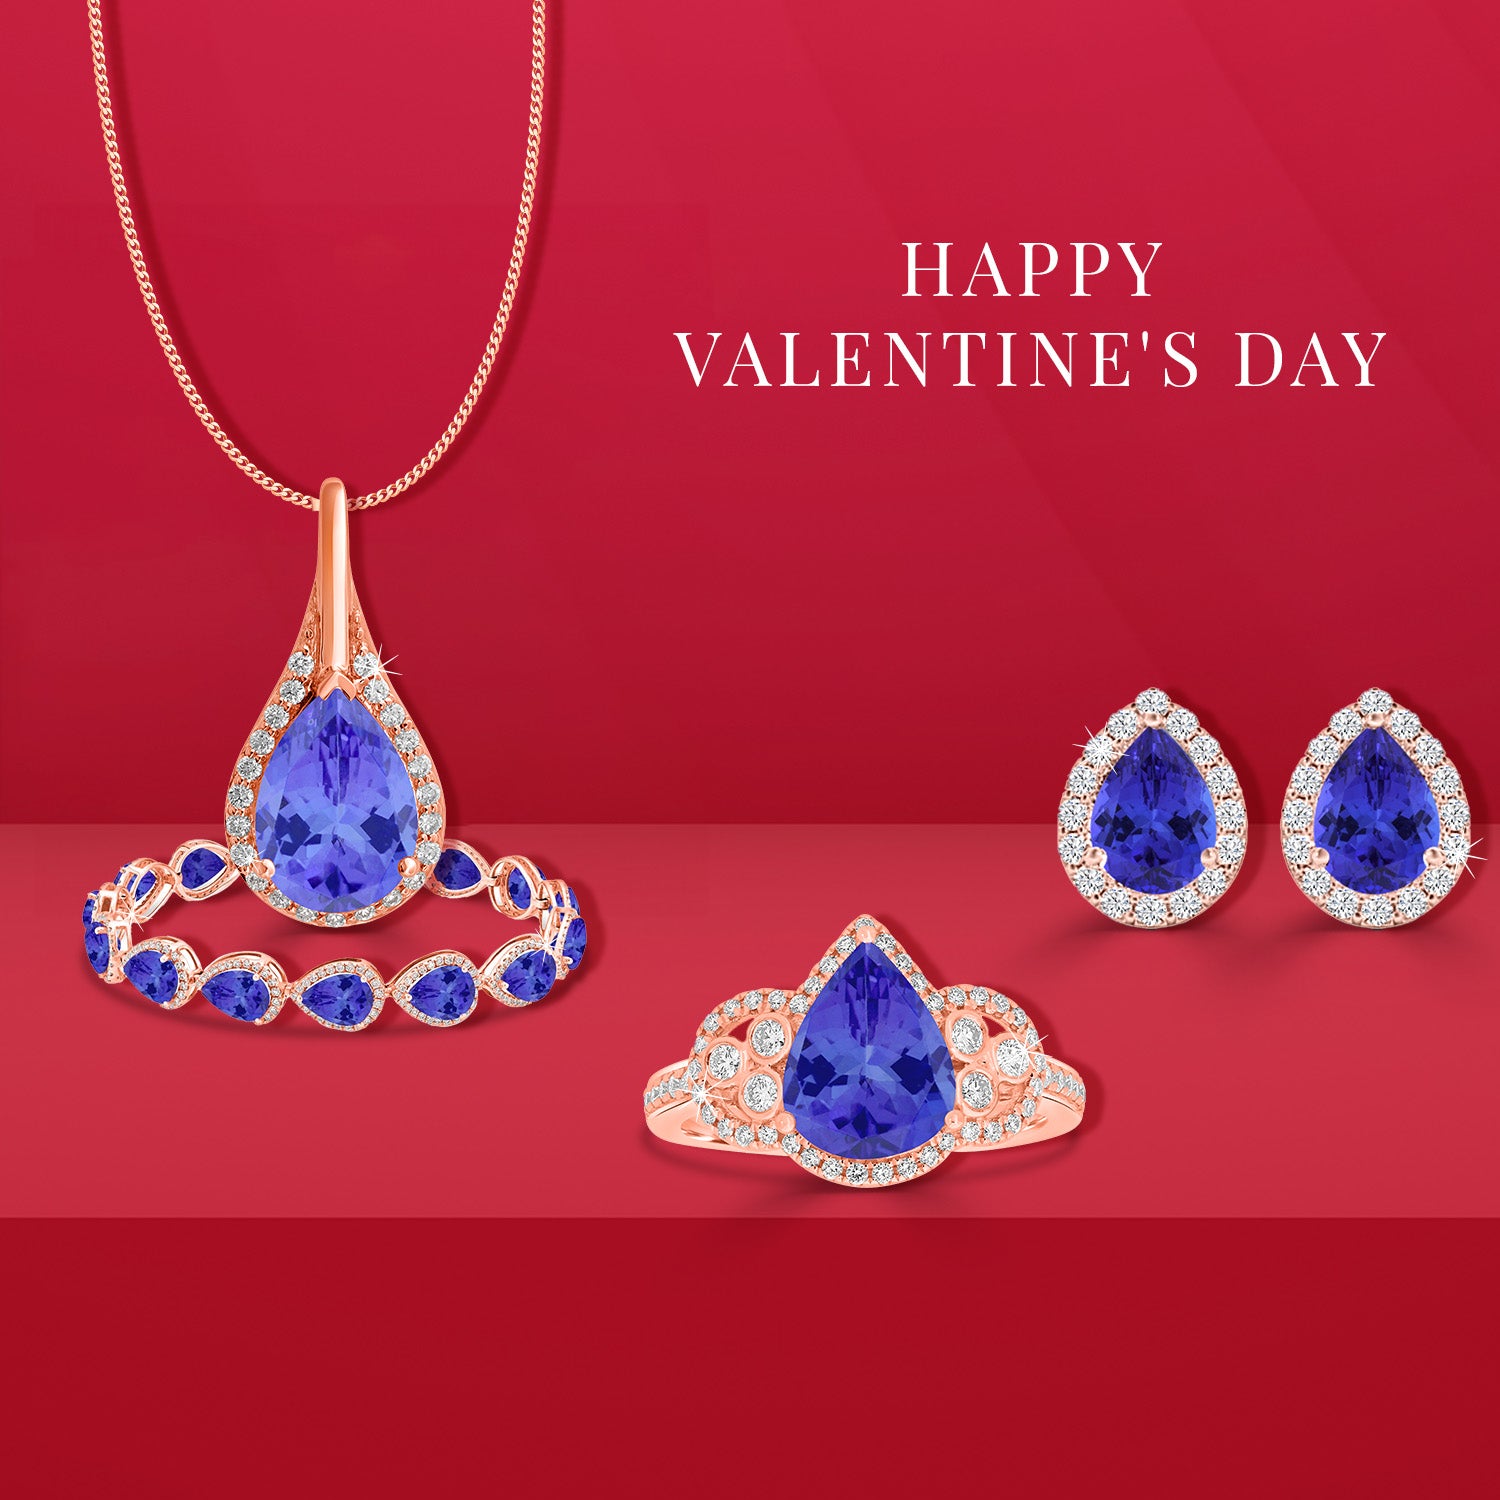 Rose Gold and Tanzanite A Perfect Pair for Valentine's Day